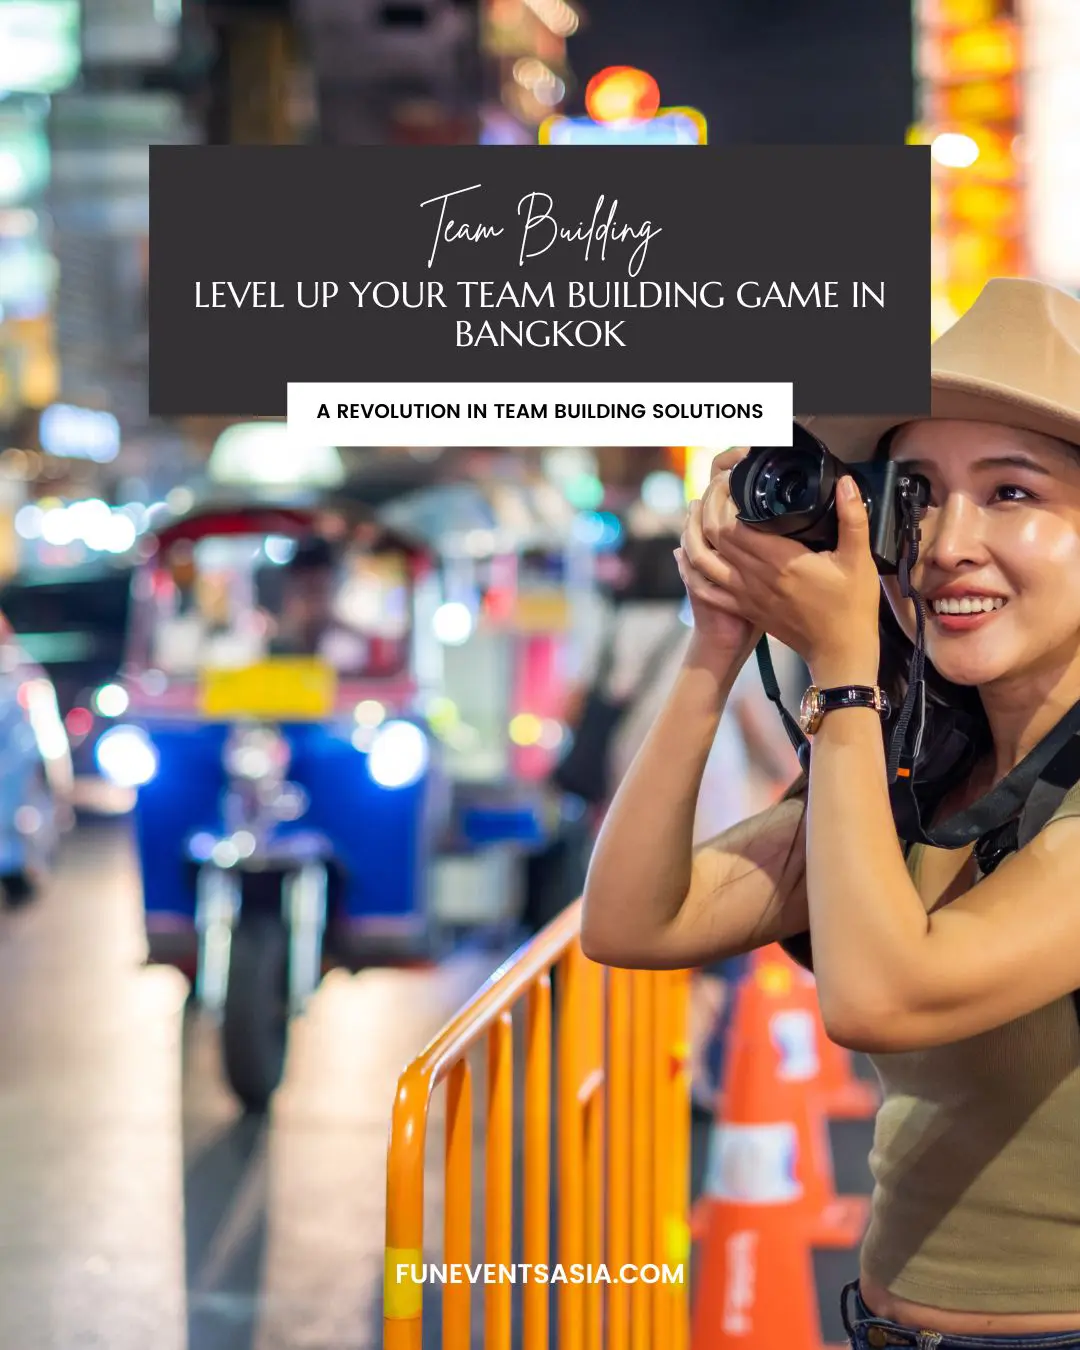 Level Up Your Team Building Game in Bangkok